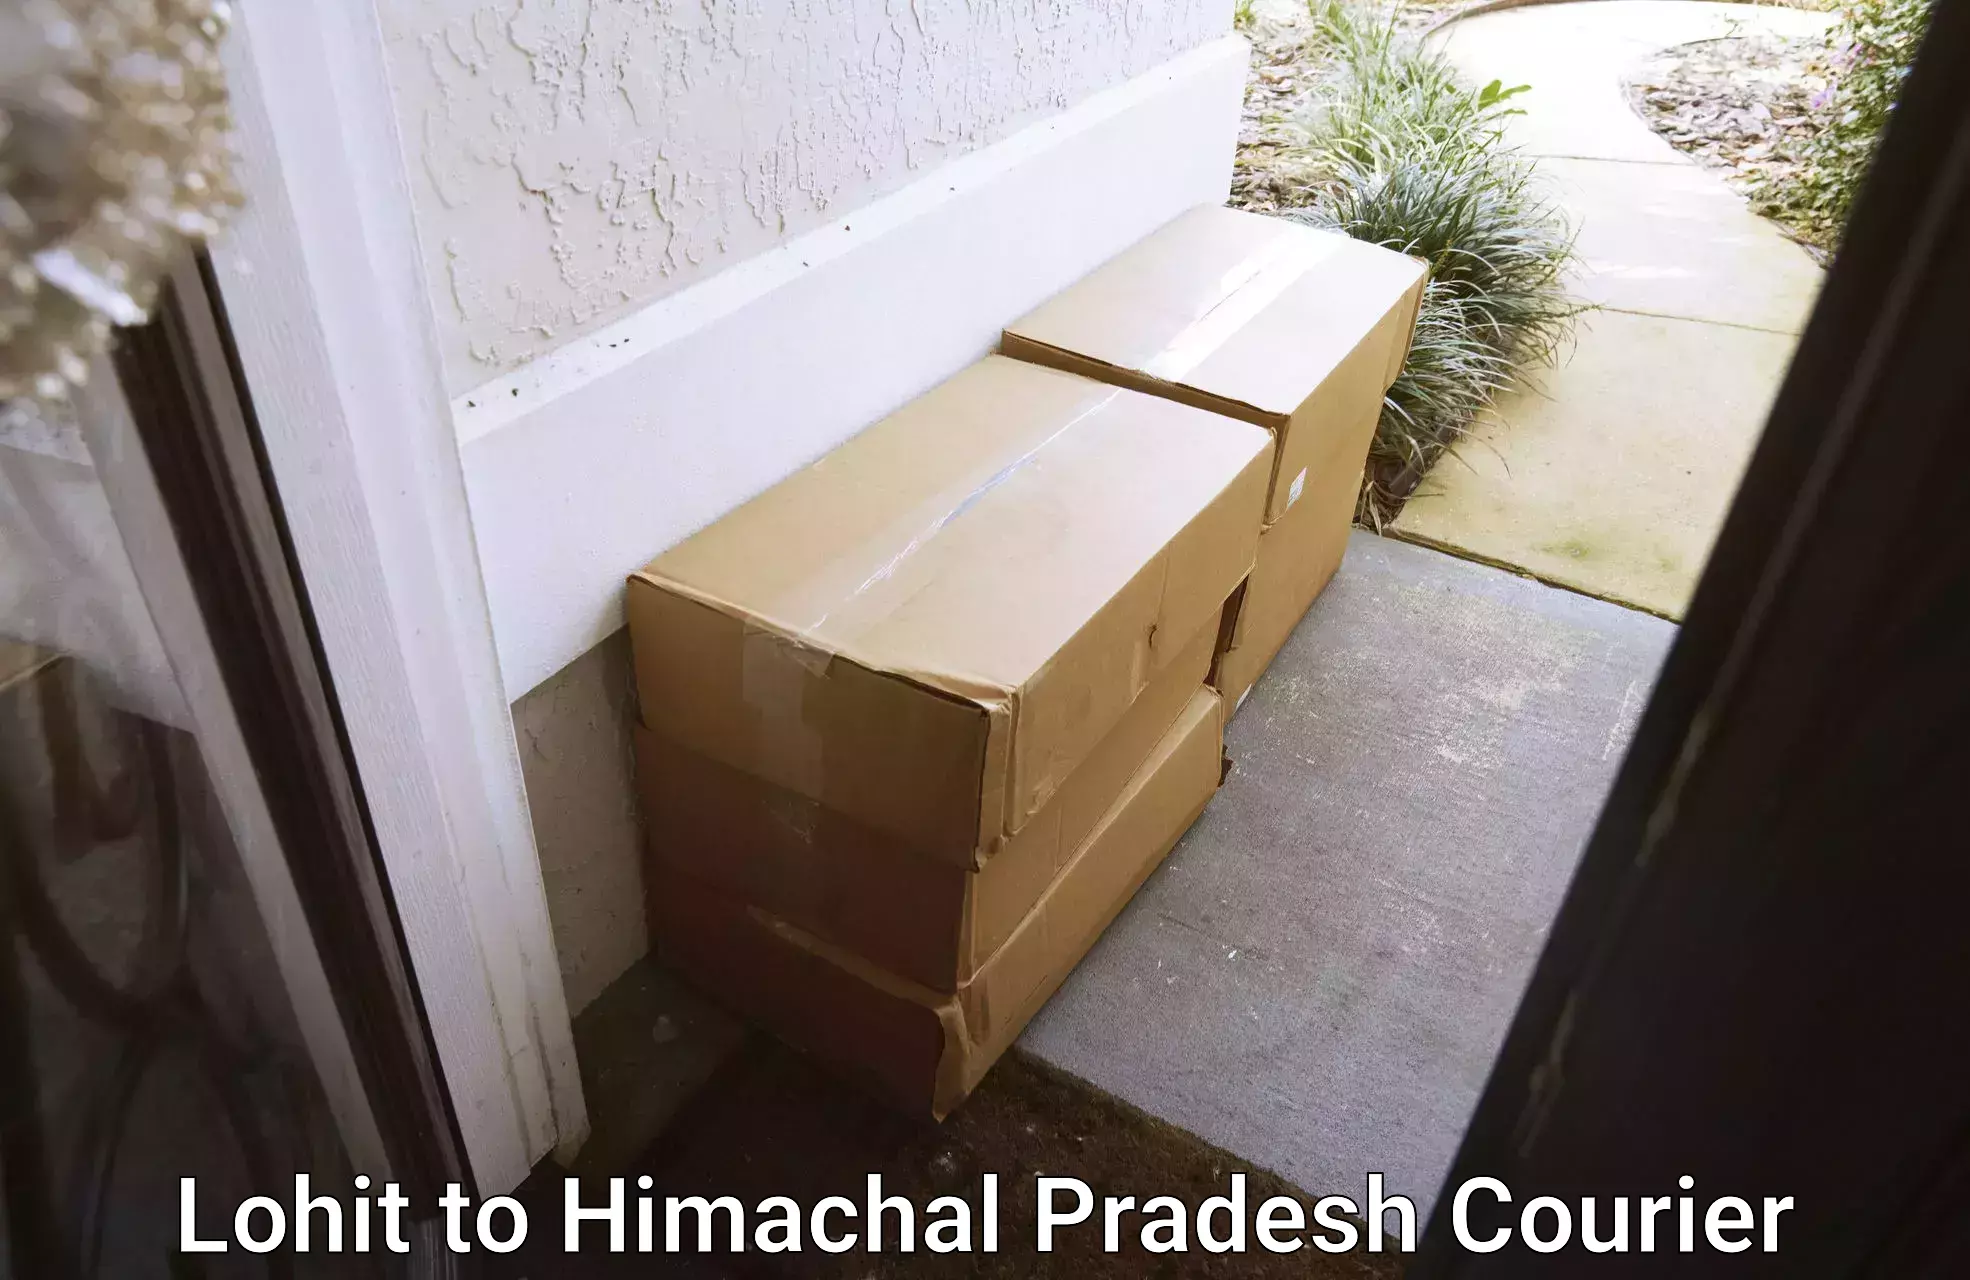 Customizable delivery plans Lohit to Himachal Pradesh